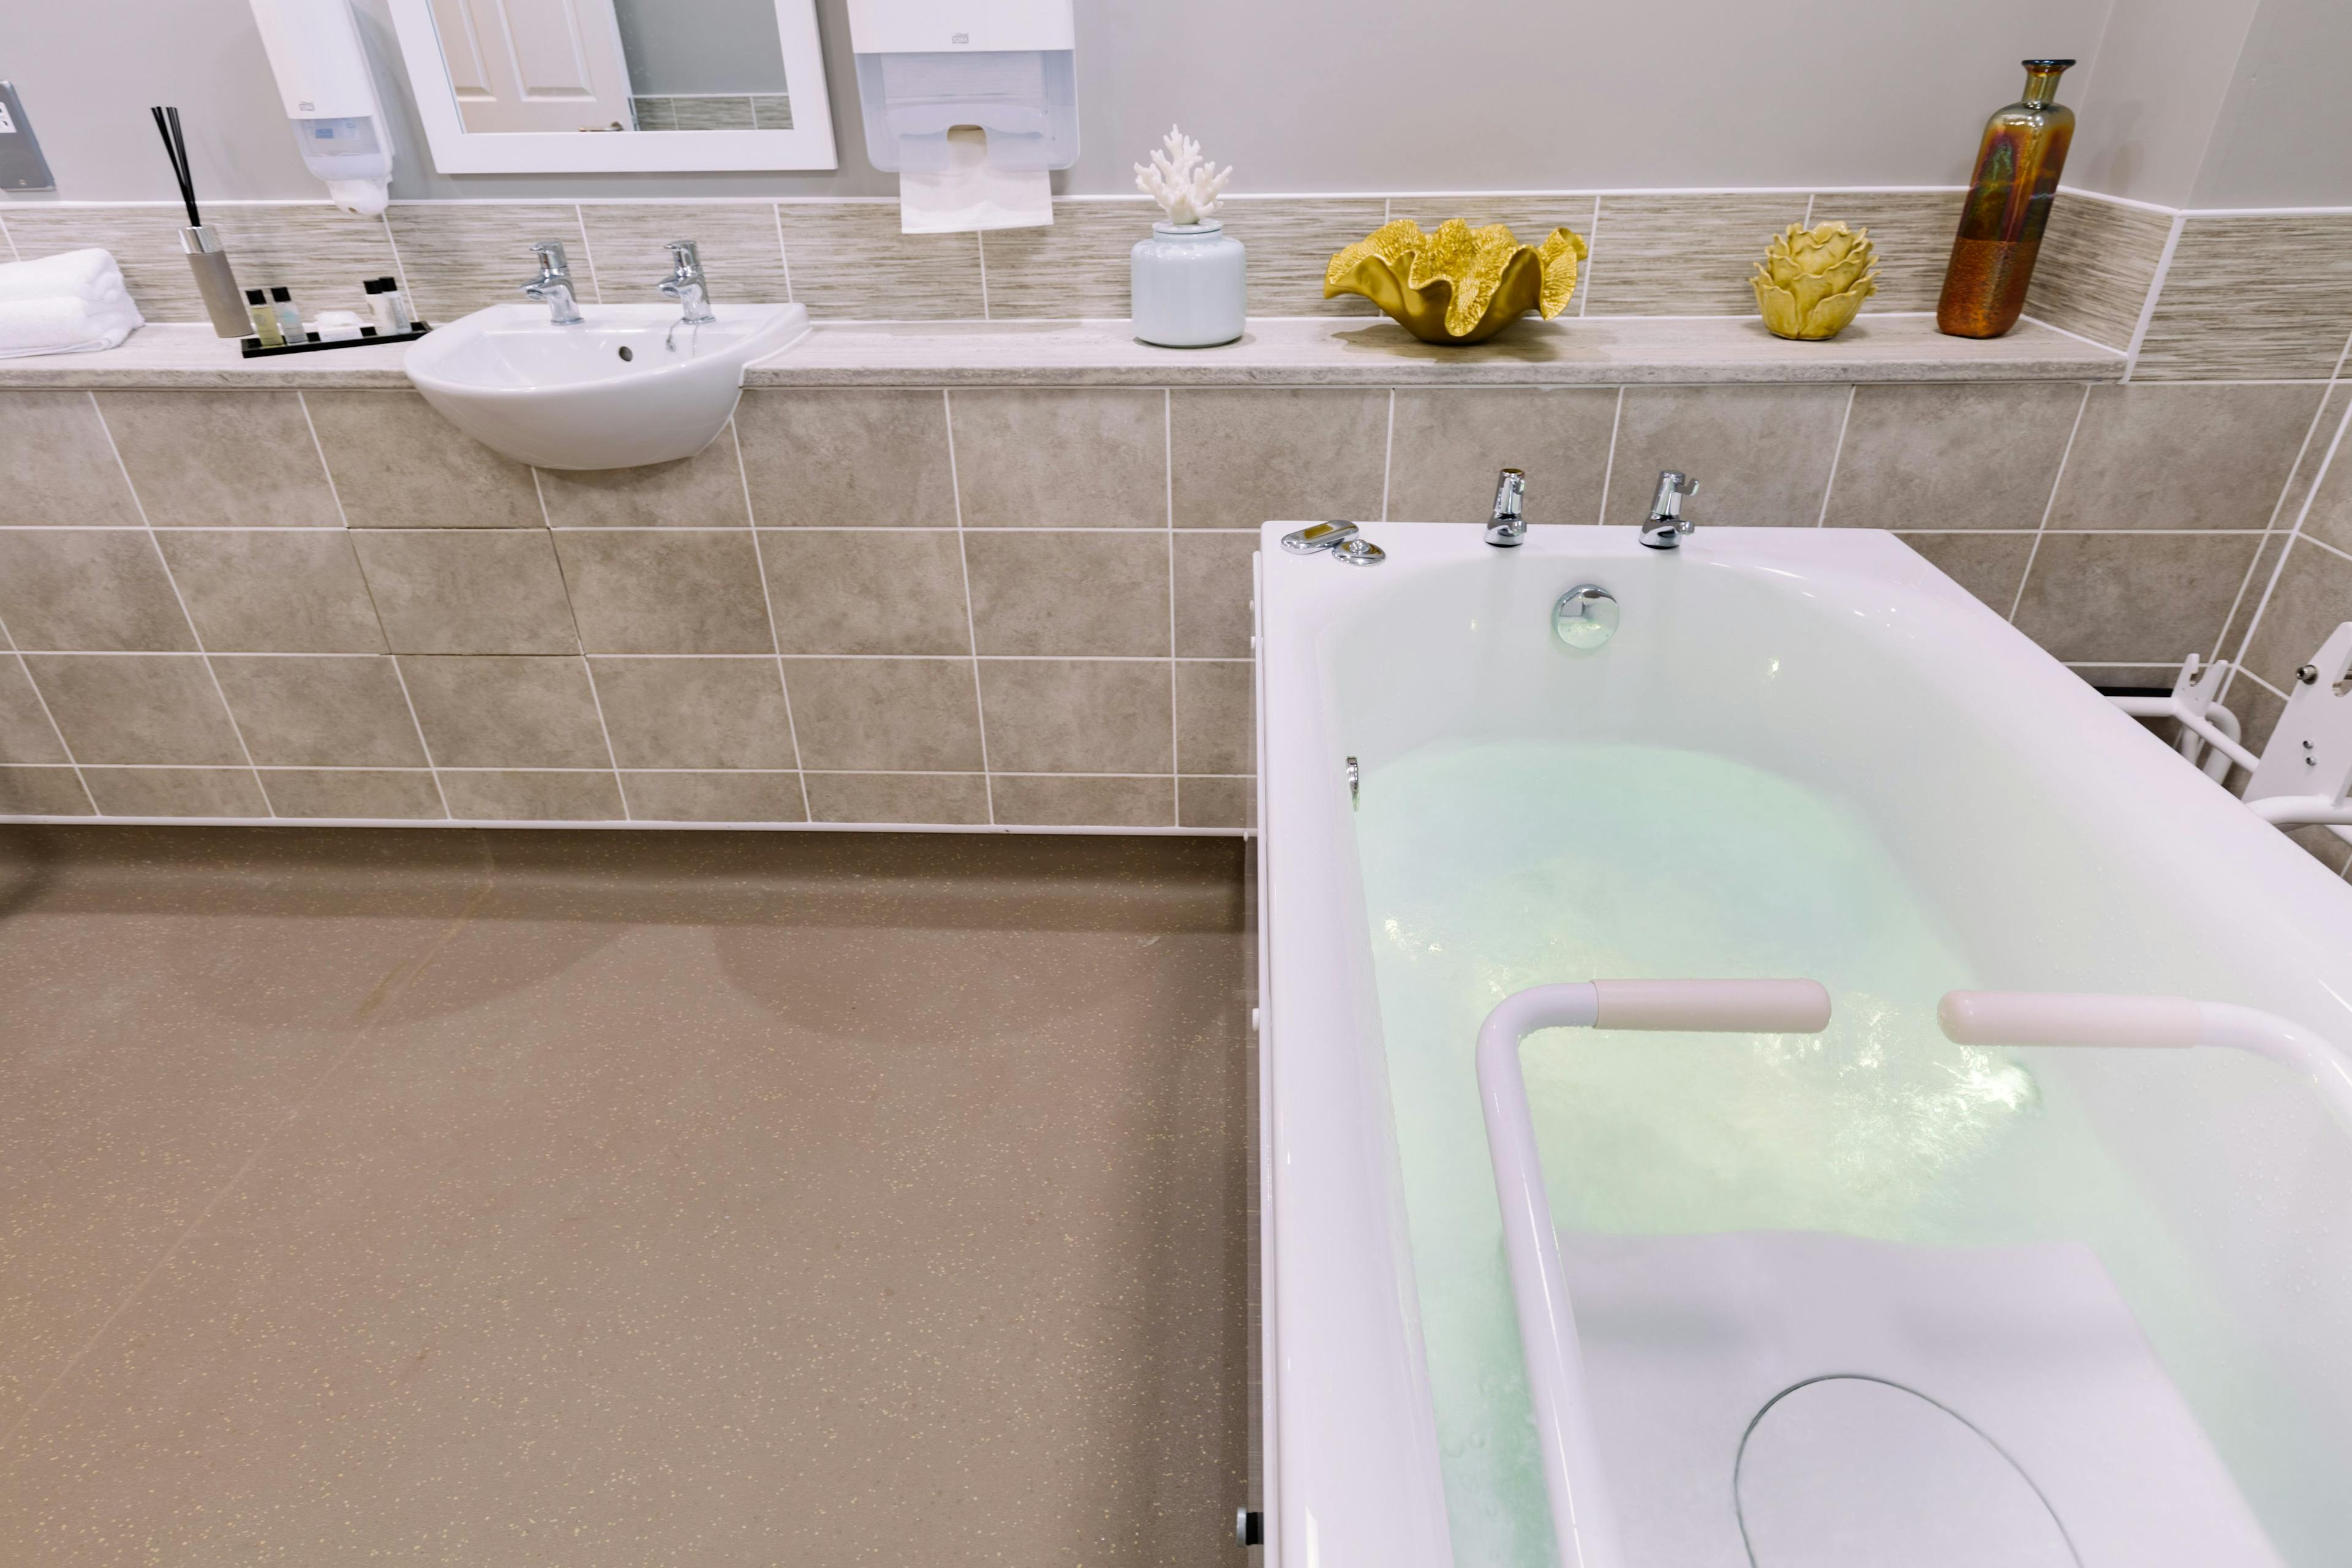 Bathroom at Ouse View Care Home in York, North Yorkshire